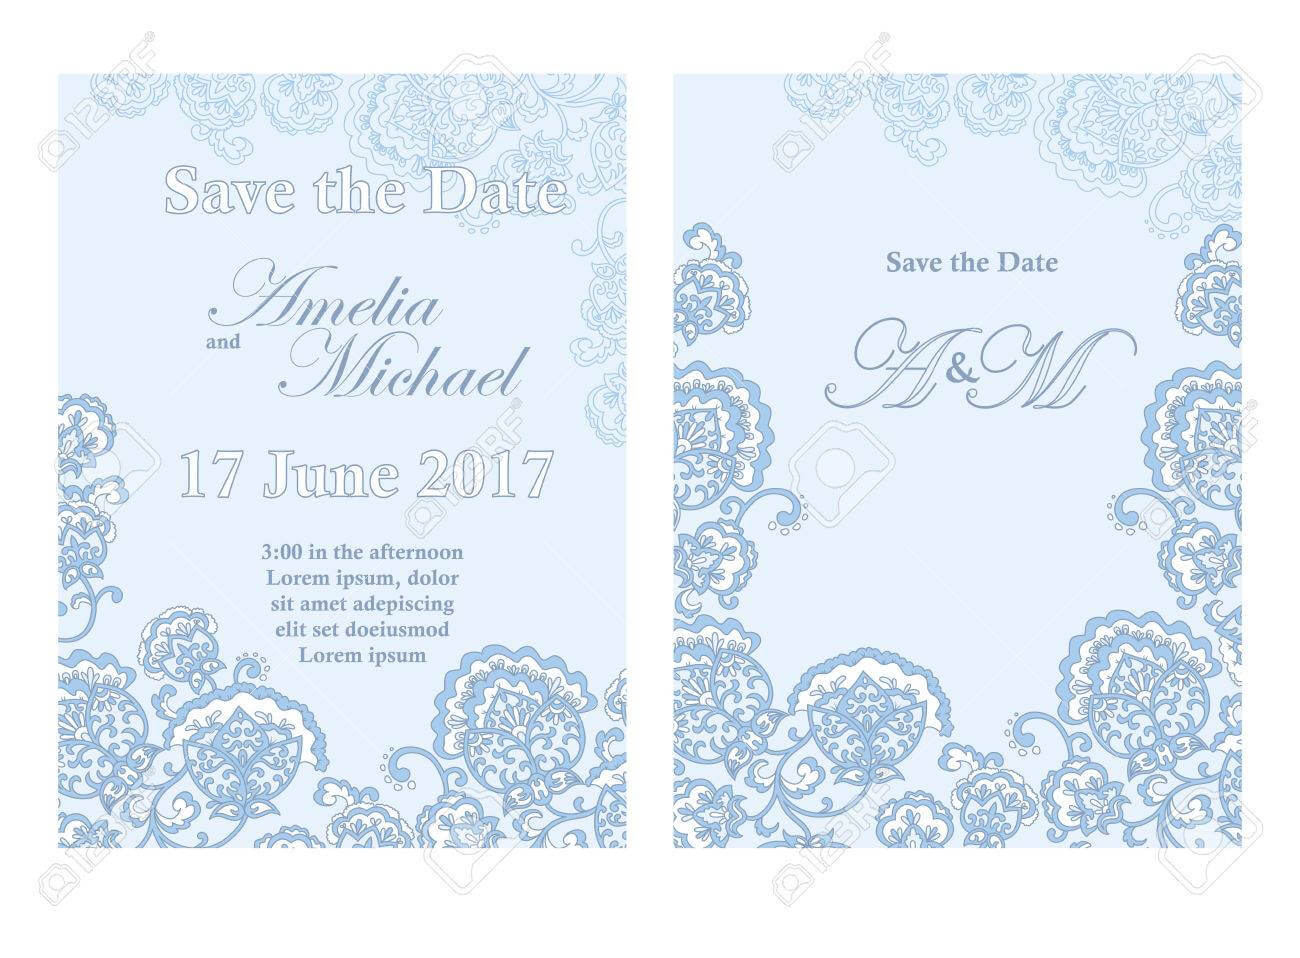 Save The Date Card Template In Light Blue Colors. Pertaining To Save The Date Cards Templates